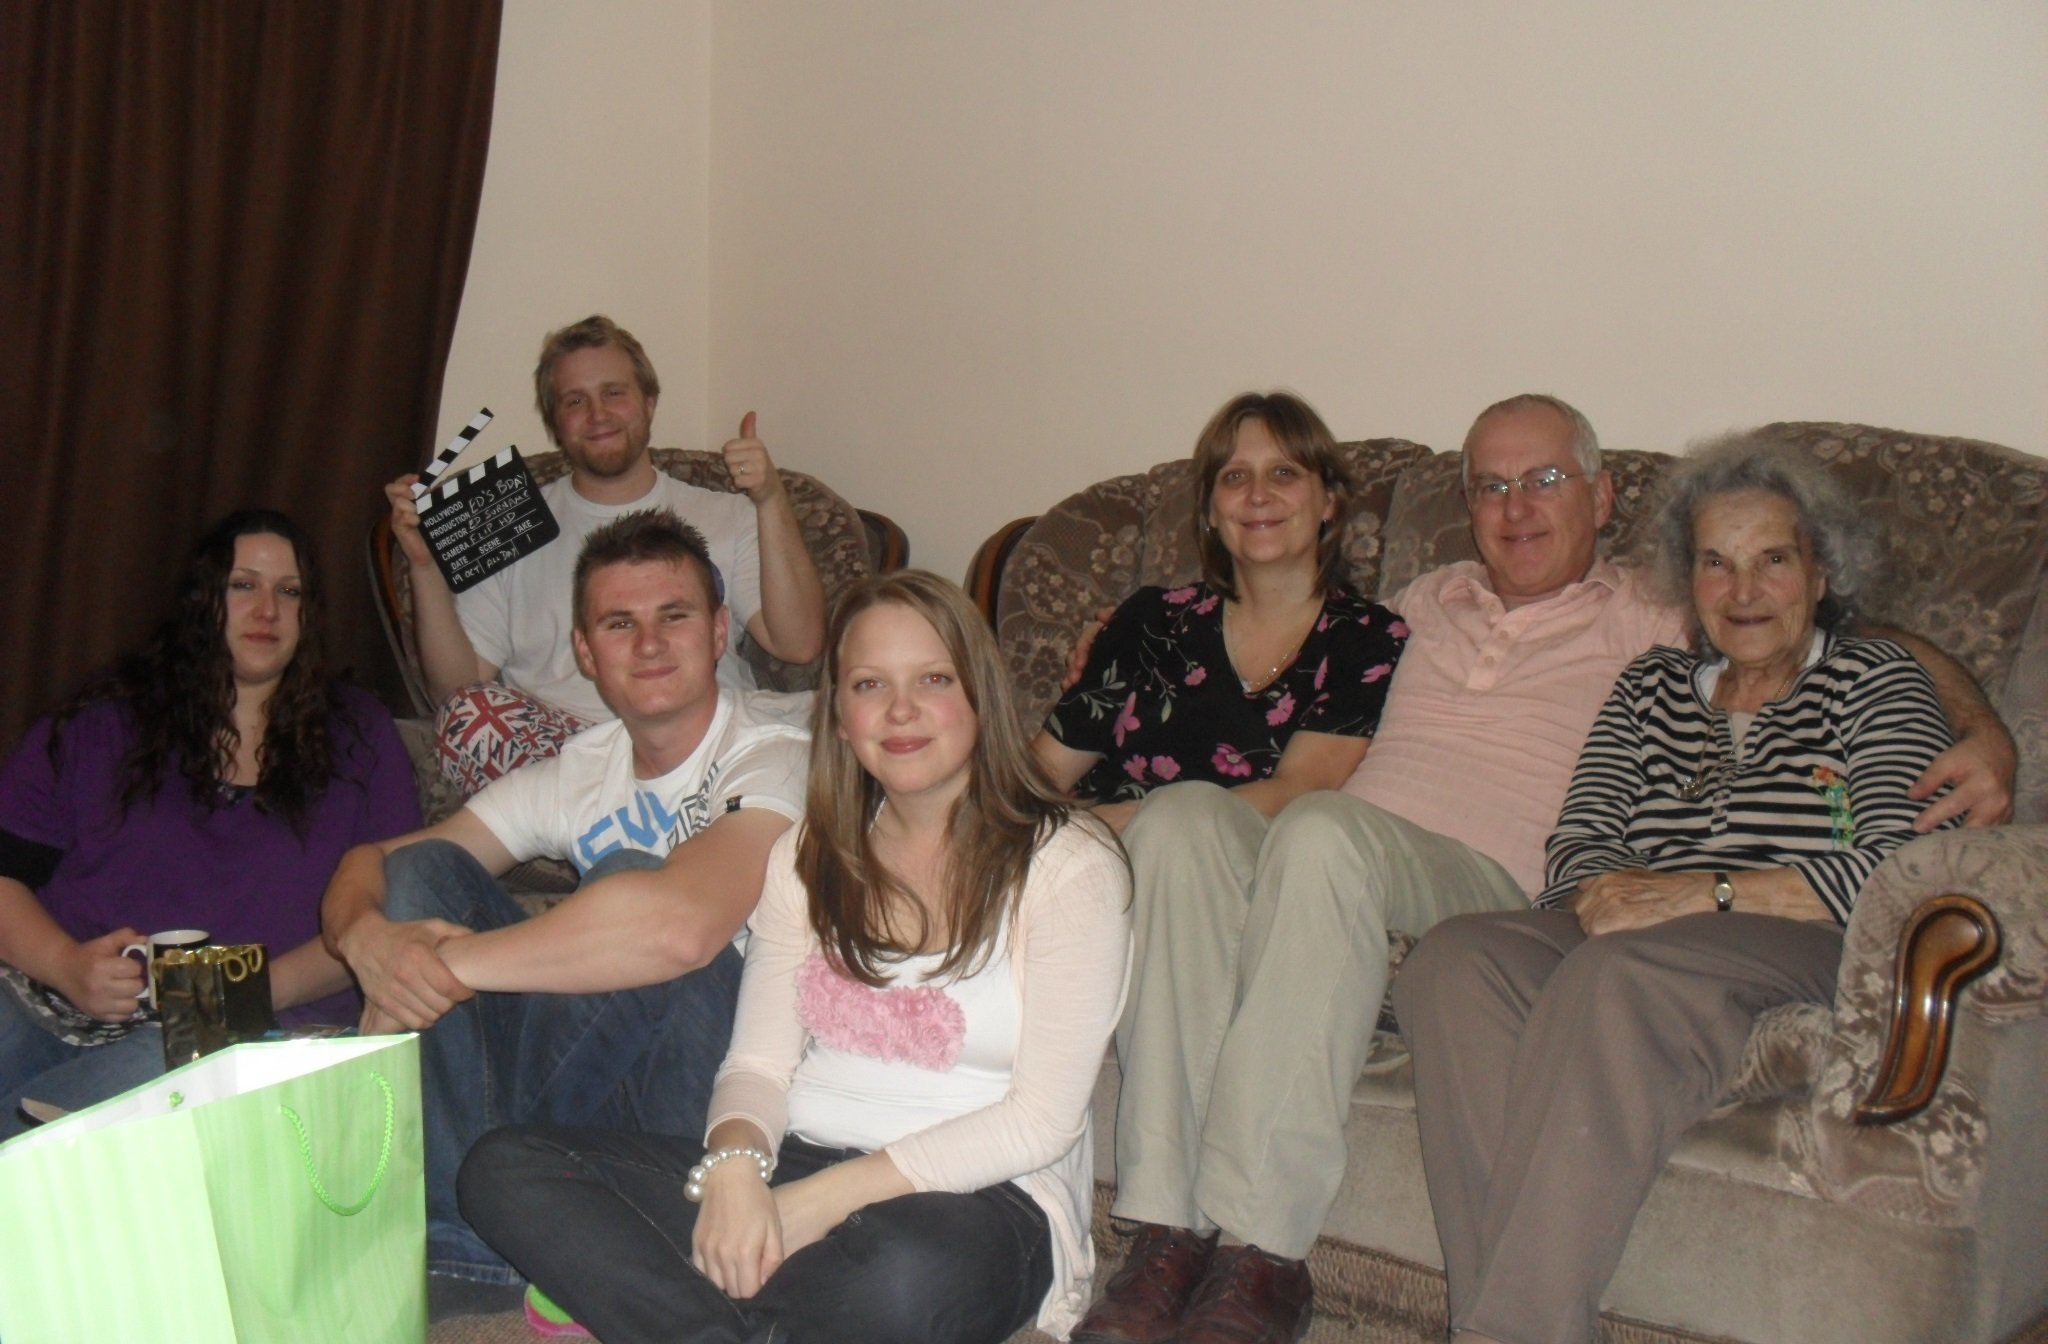 Cast of Unsolicited Material (2015) from left to right: Tina Bedroom, Ed Surname, Tommy, Betty, Mum, Papa Surname, Nan.